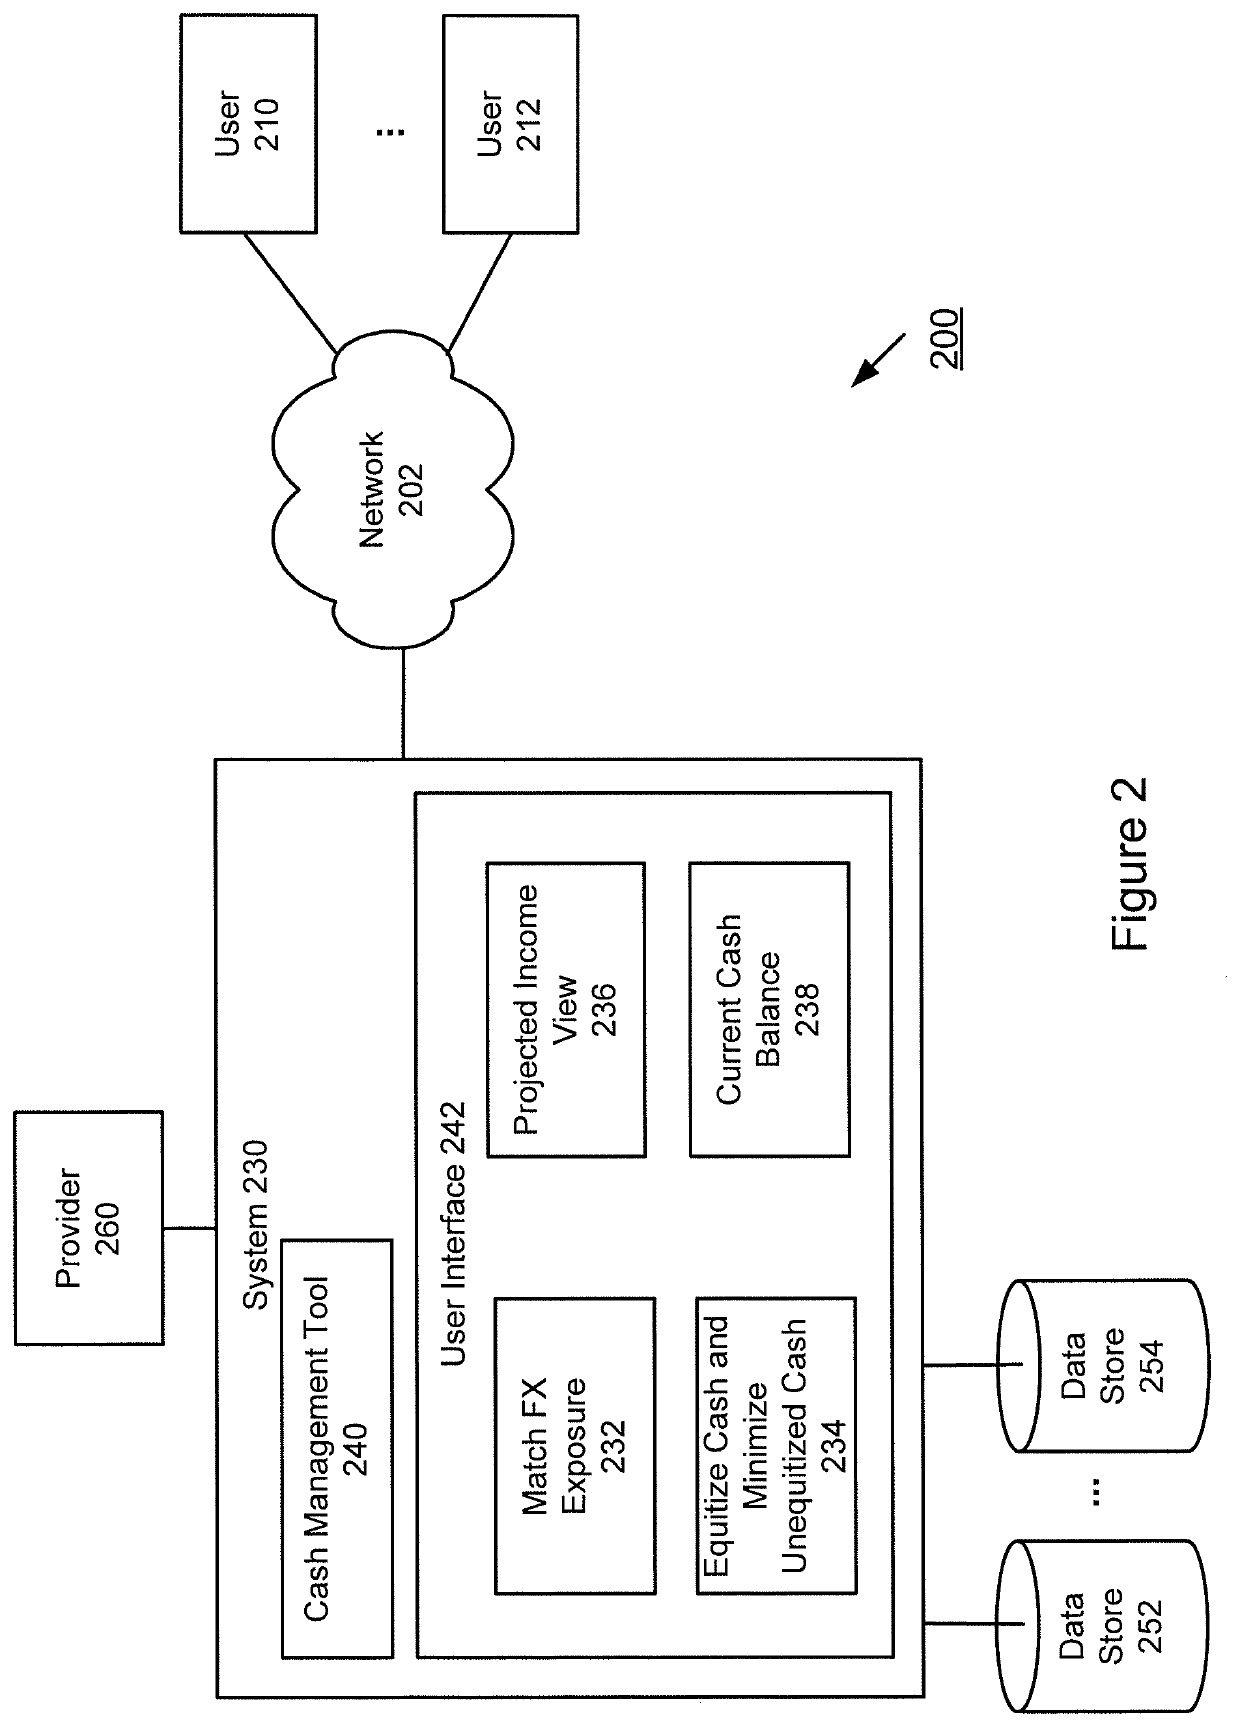 Method and system for implementing a cash management tool